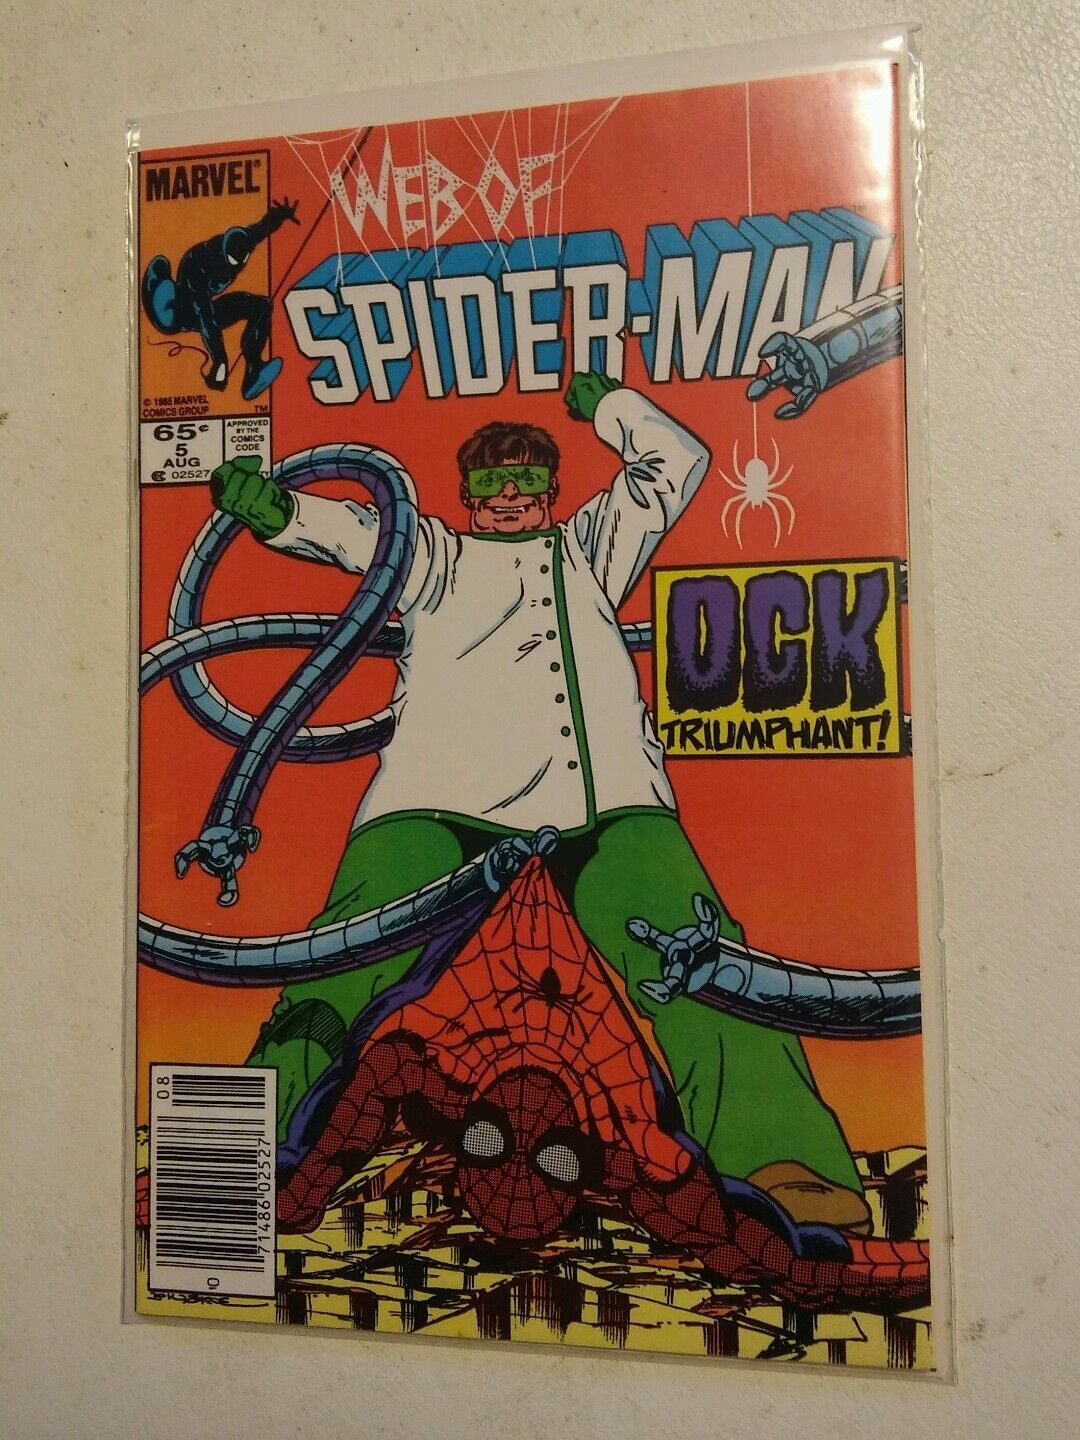 Primary image for 000 Vintage Marvel Comic Book Web Of Spider-Man #5 August Ock Triumphant